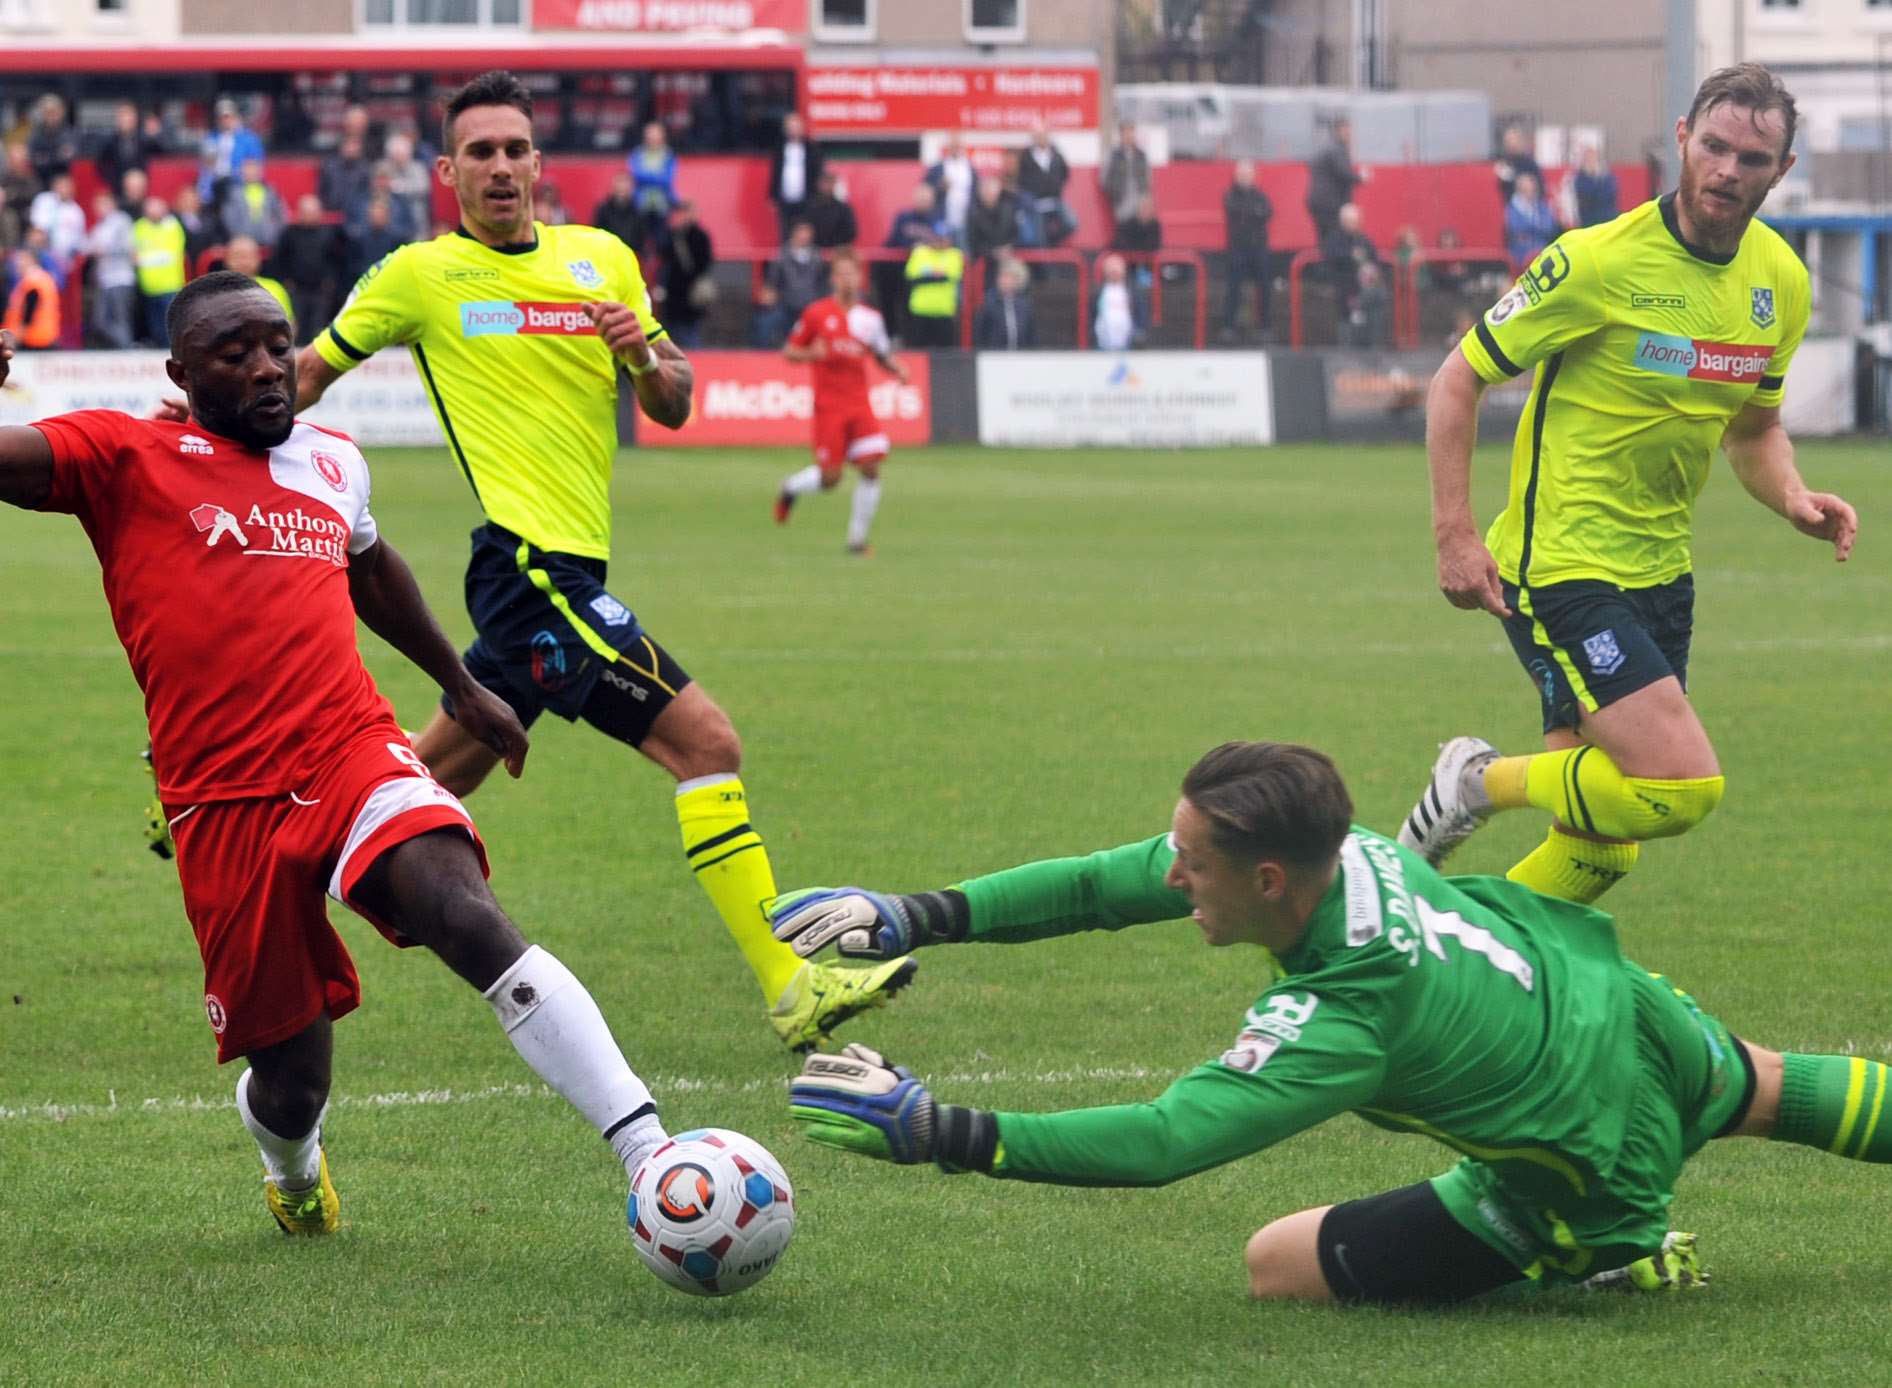 Welling's Sahr Kabba in action against Tranmere on Saturday. Picture: David Brown